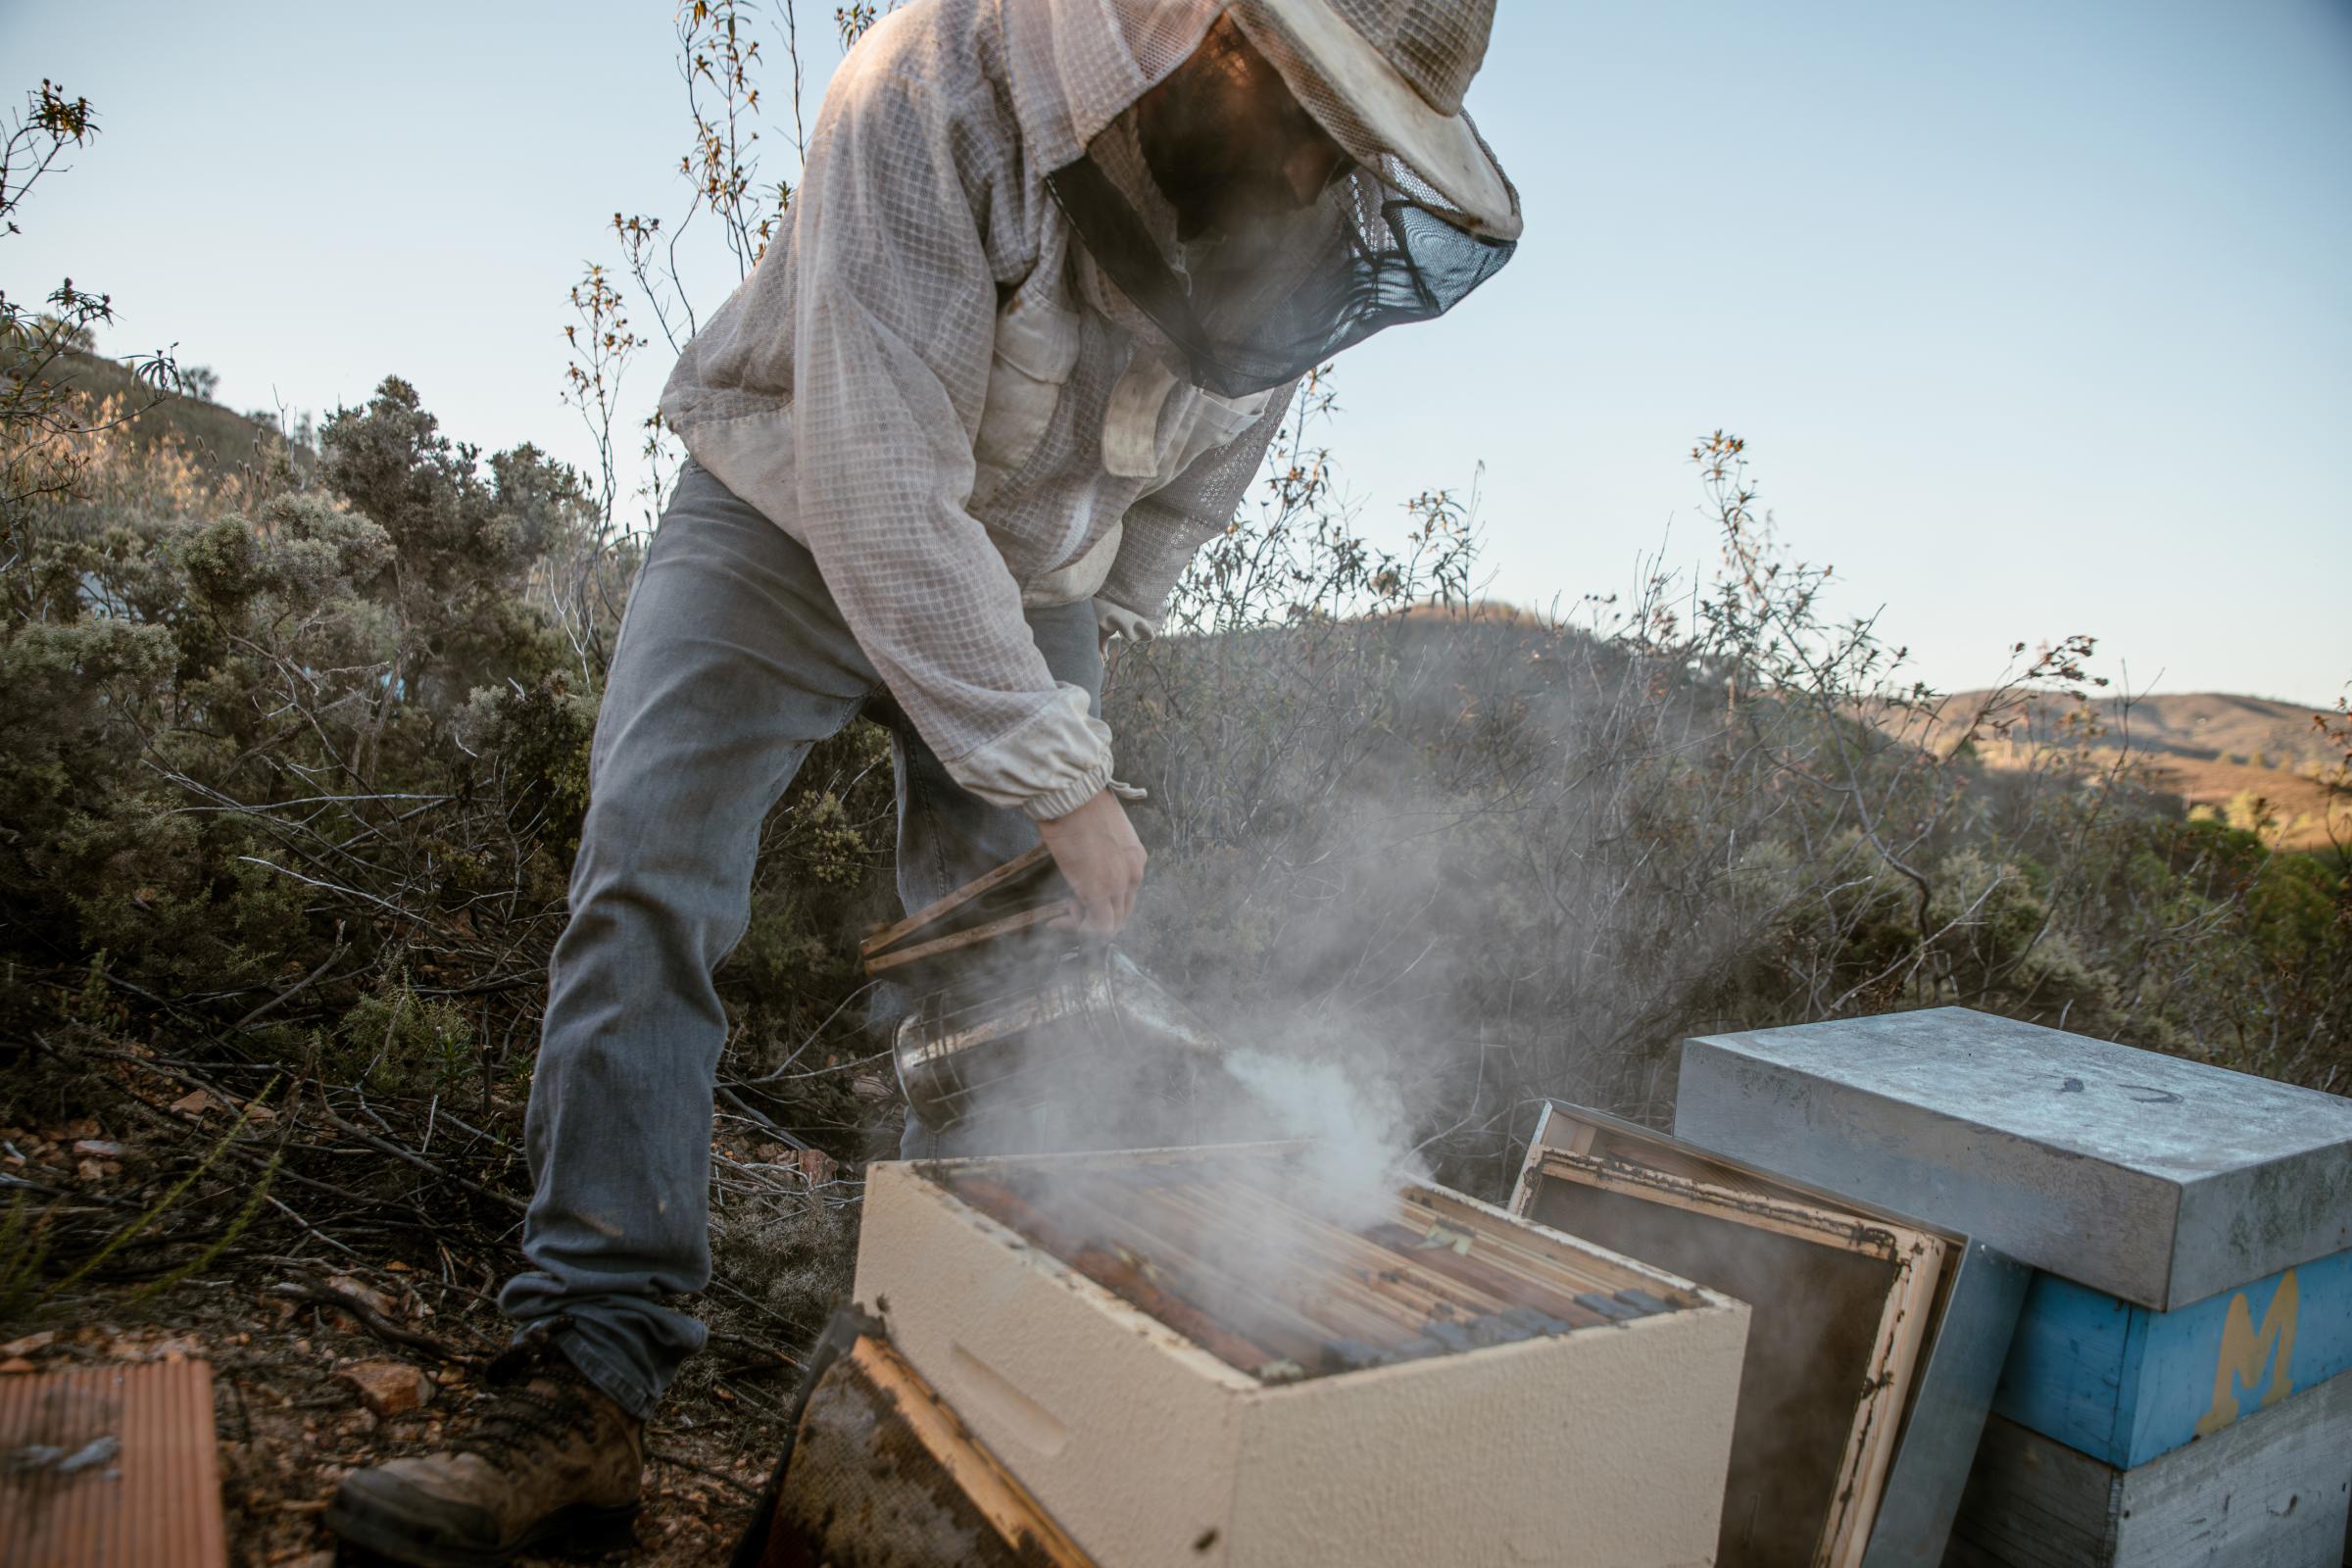 Portuguese Bee. - Tomas begins his work on the hives.